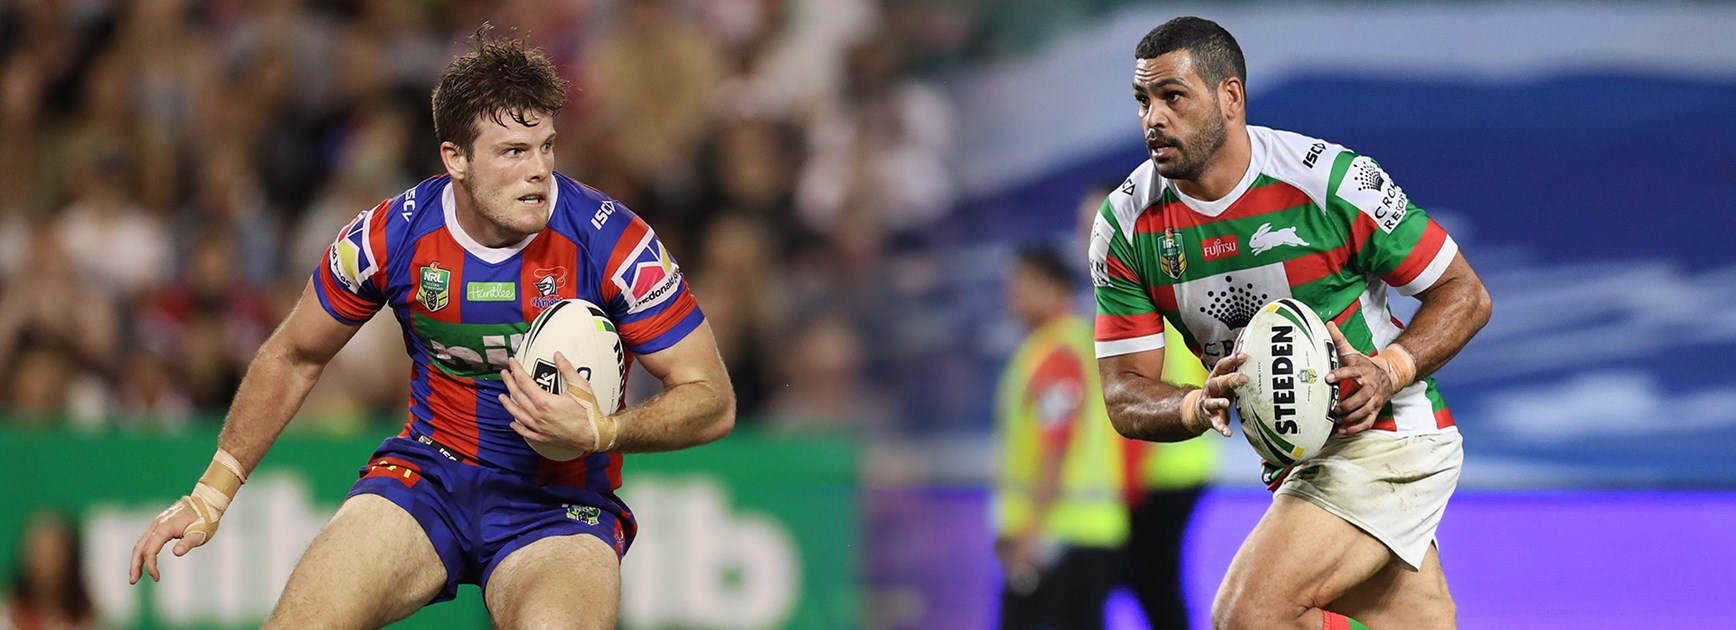 NRL match preview: Round 9